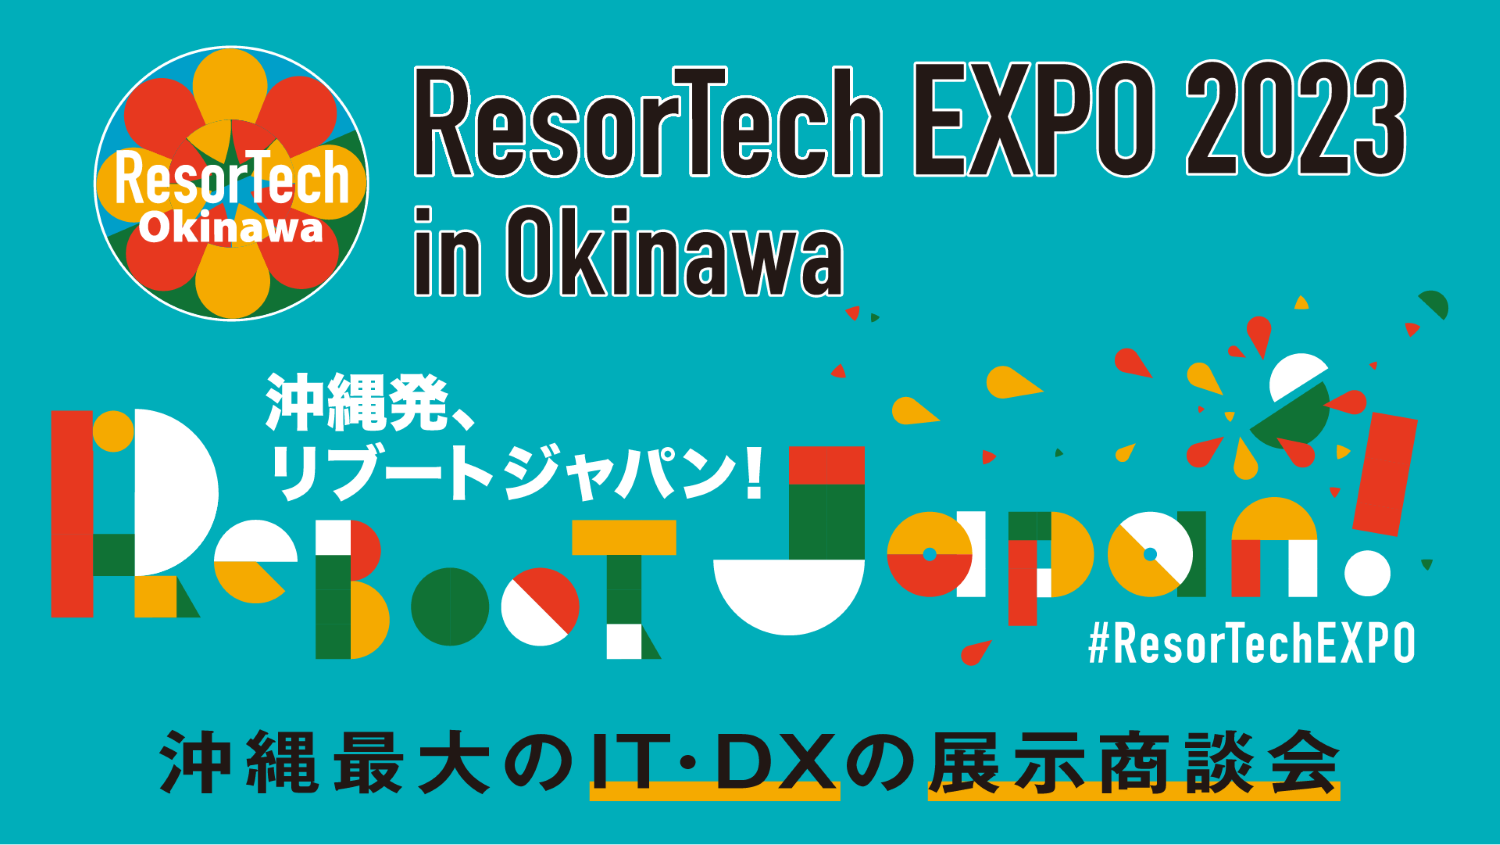 ResorTech EXPO 2023 in Okinawa_1500 x 845のバナーデザイン